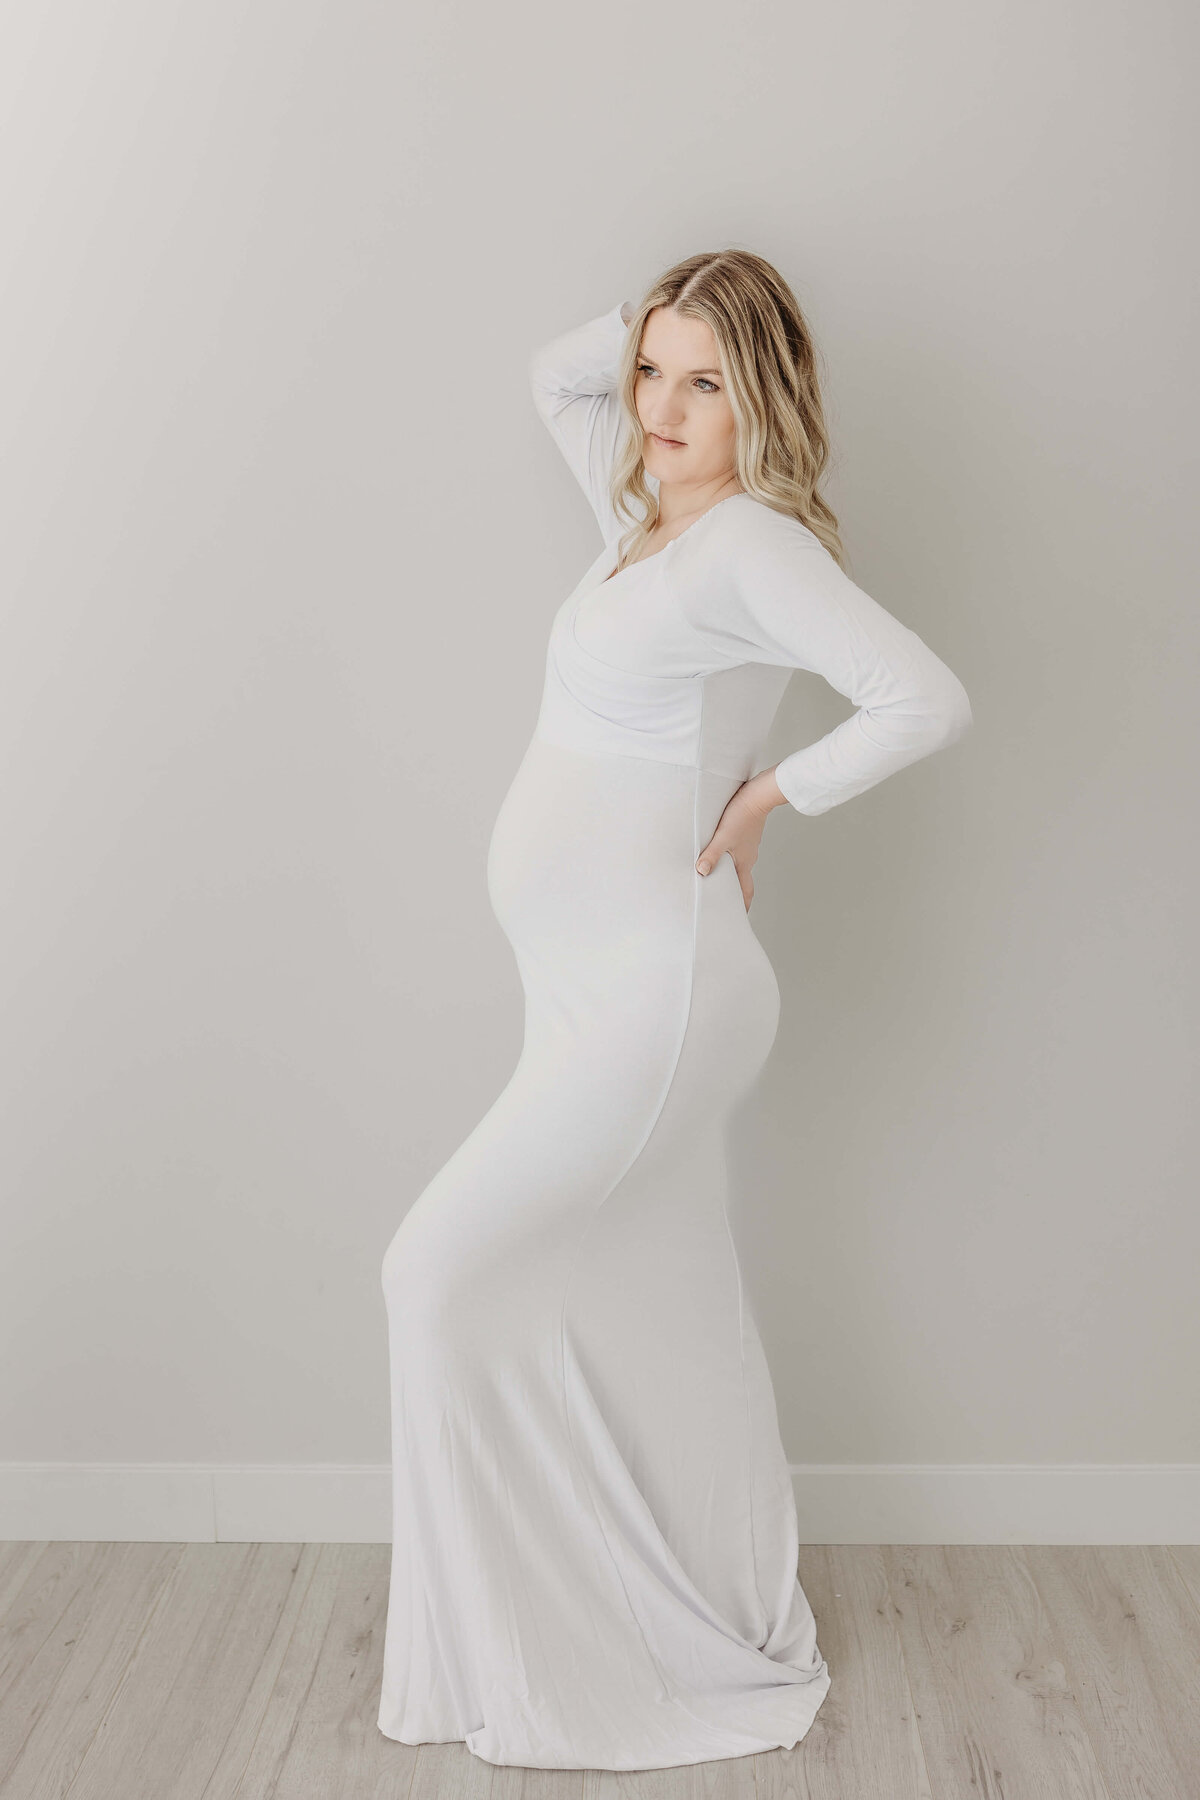 Mom in full white gown and posing pregnant